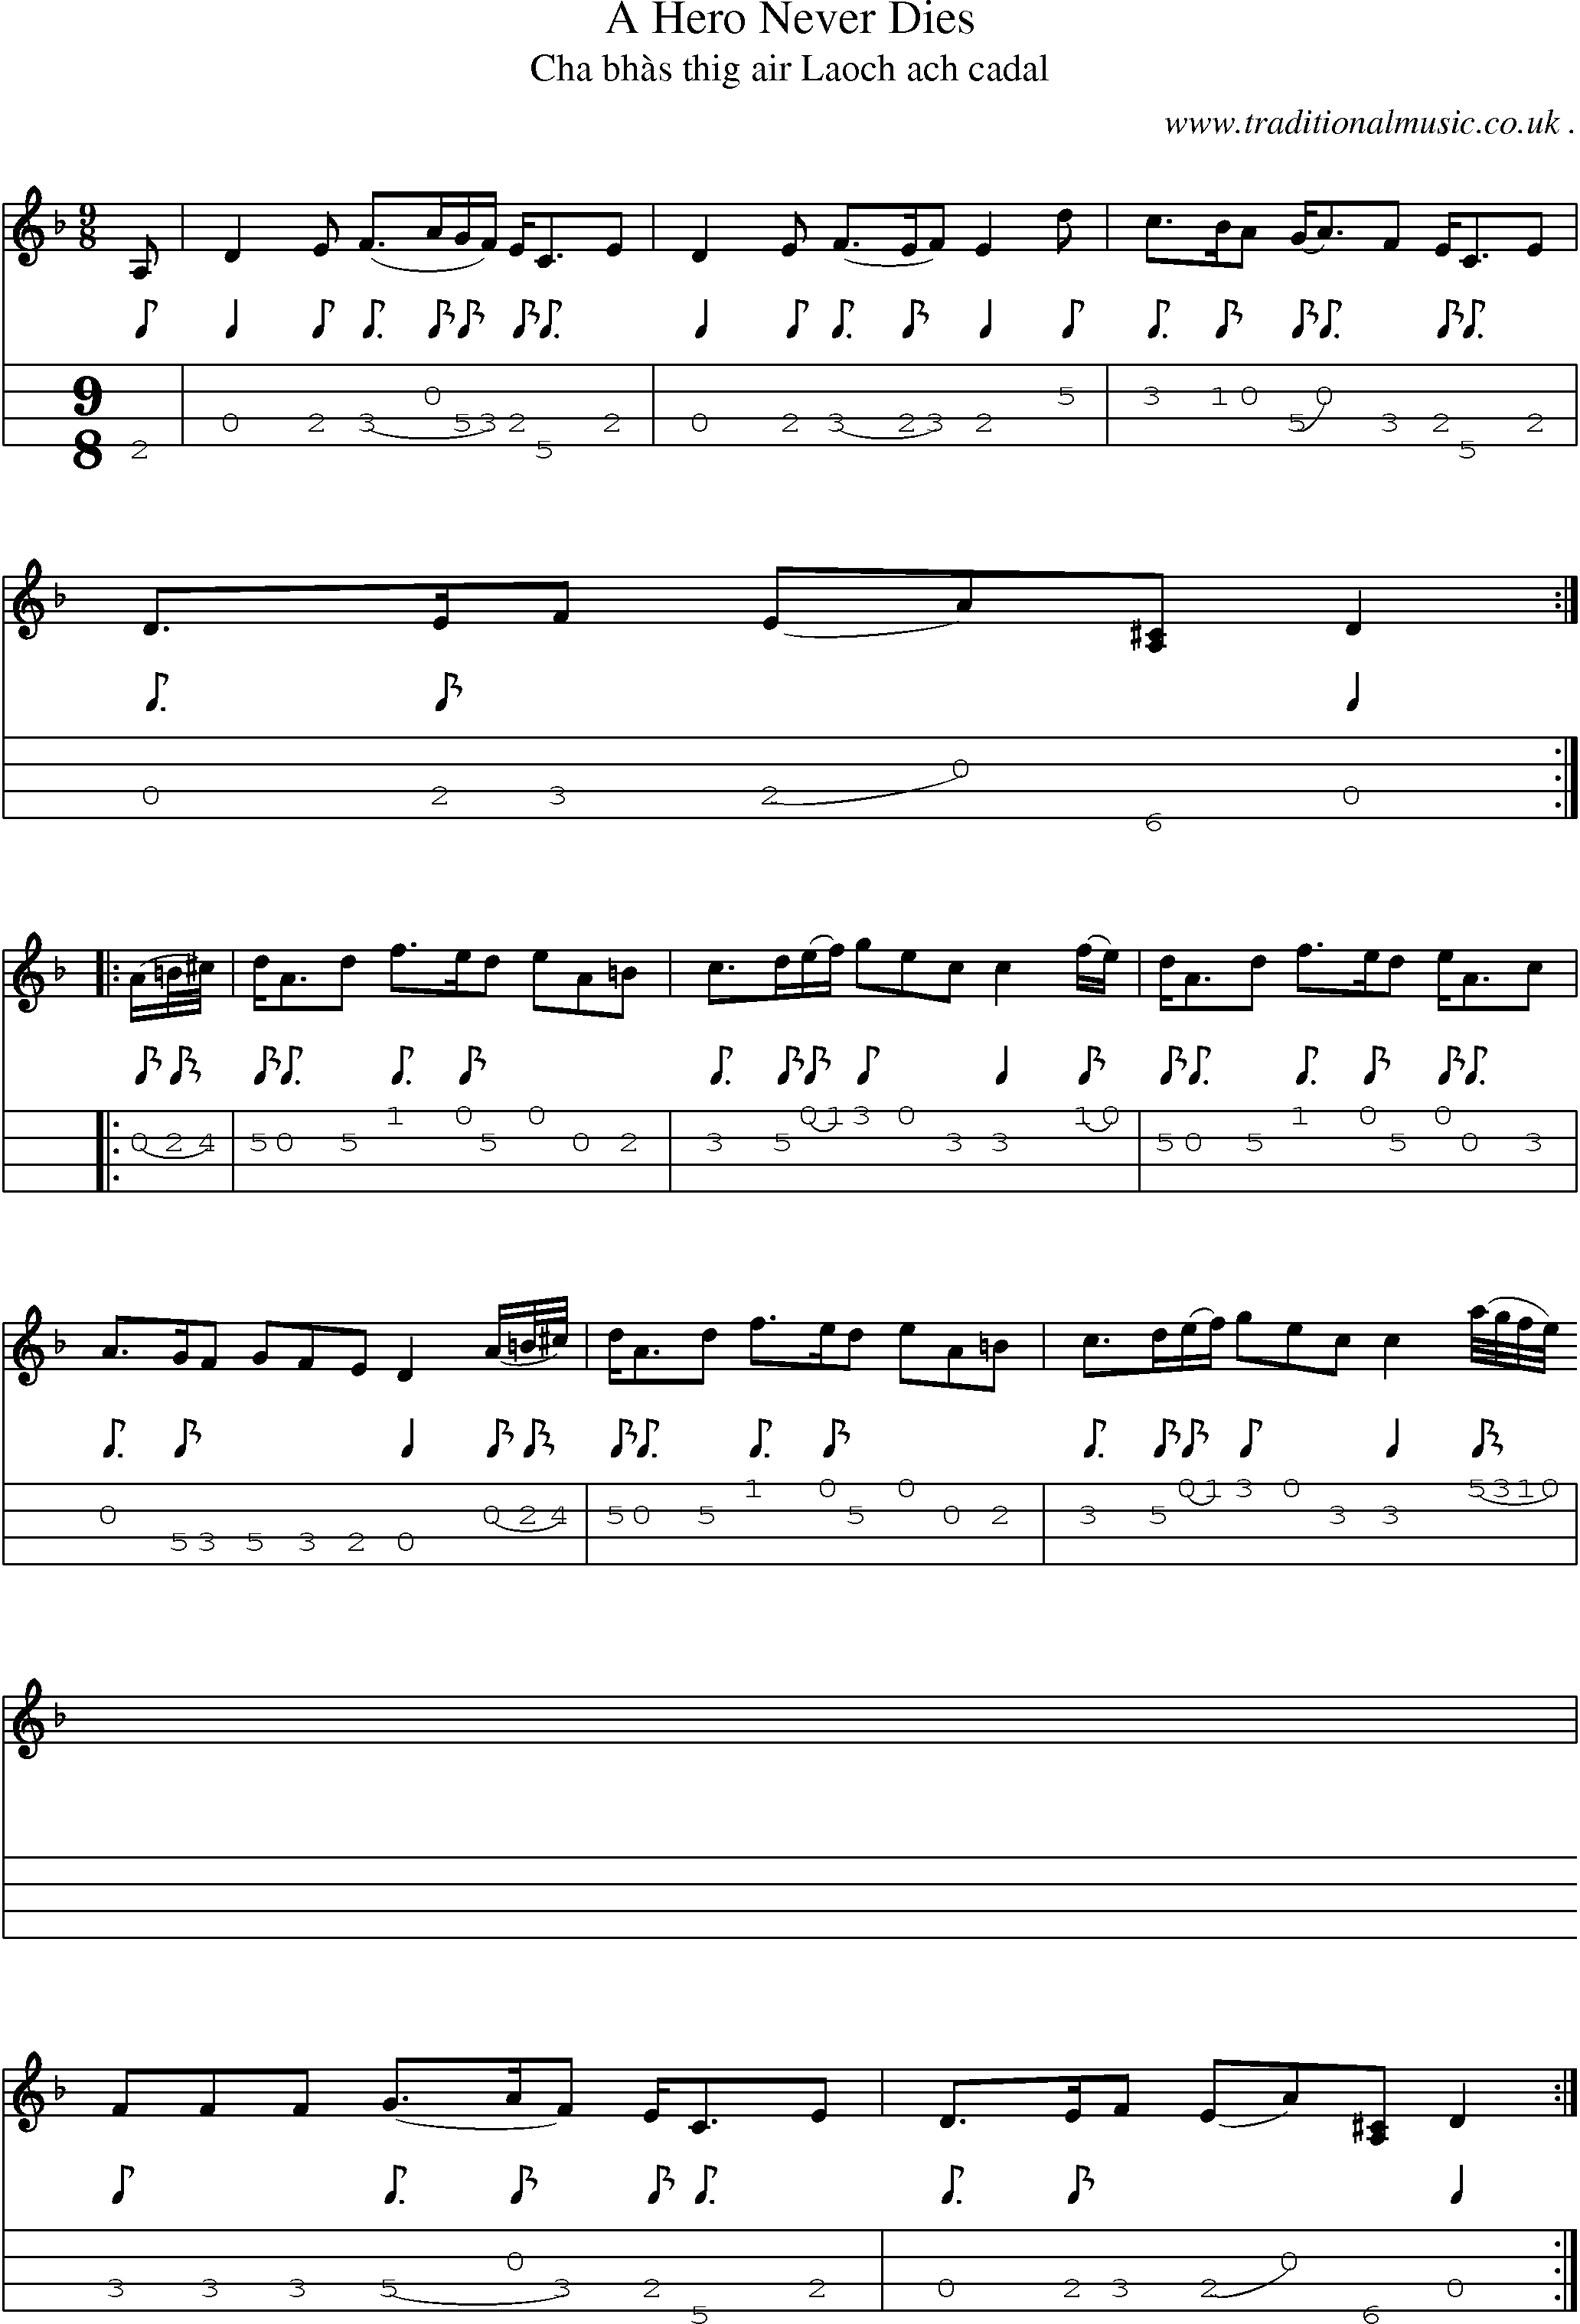 Sheet-music  score, Chords and Mandolin Tabs for A Hero Never Dies